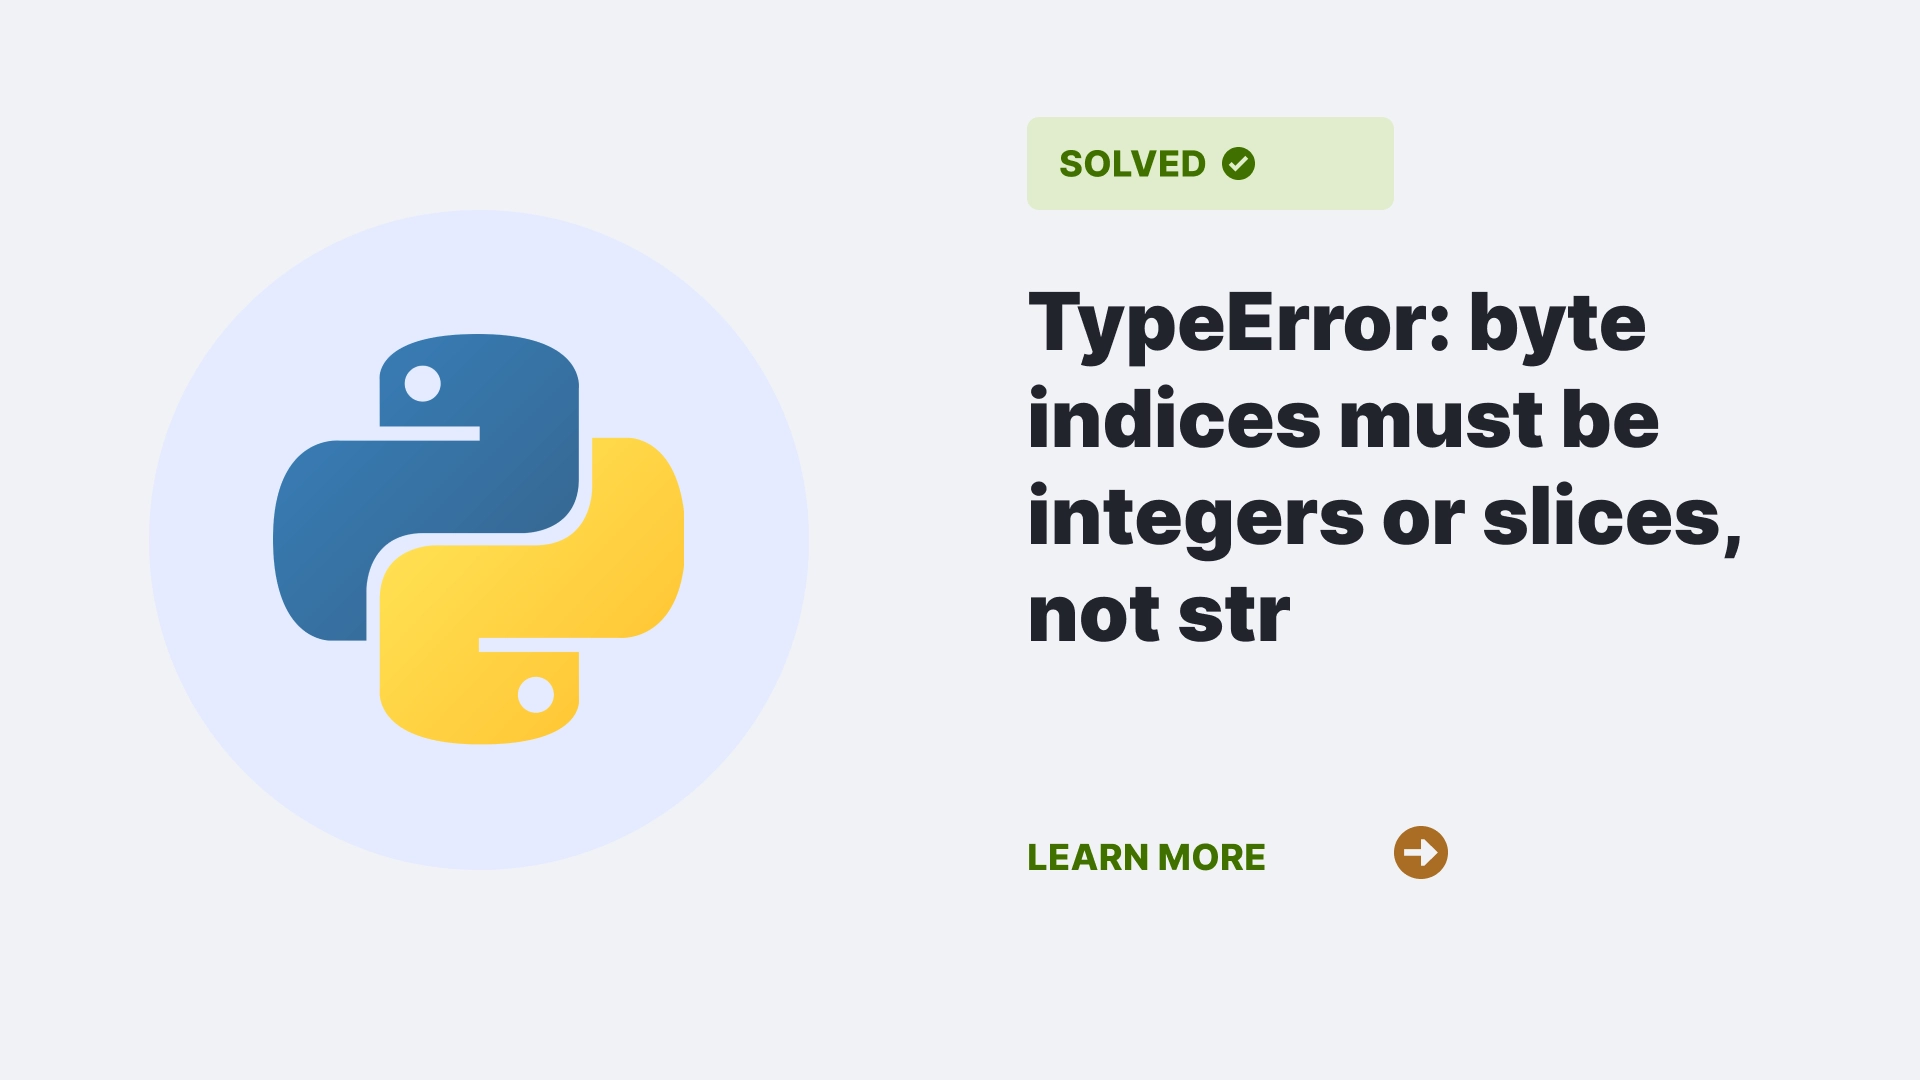 TypeError: byte indices must be integers or slices, not str